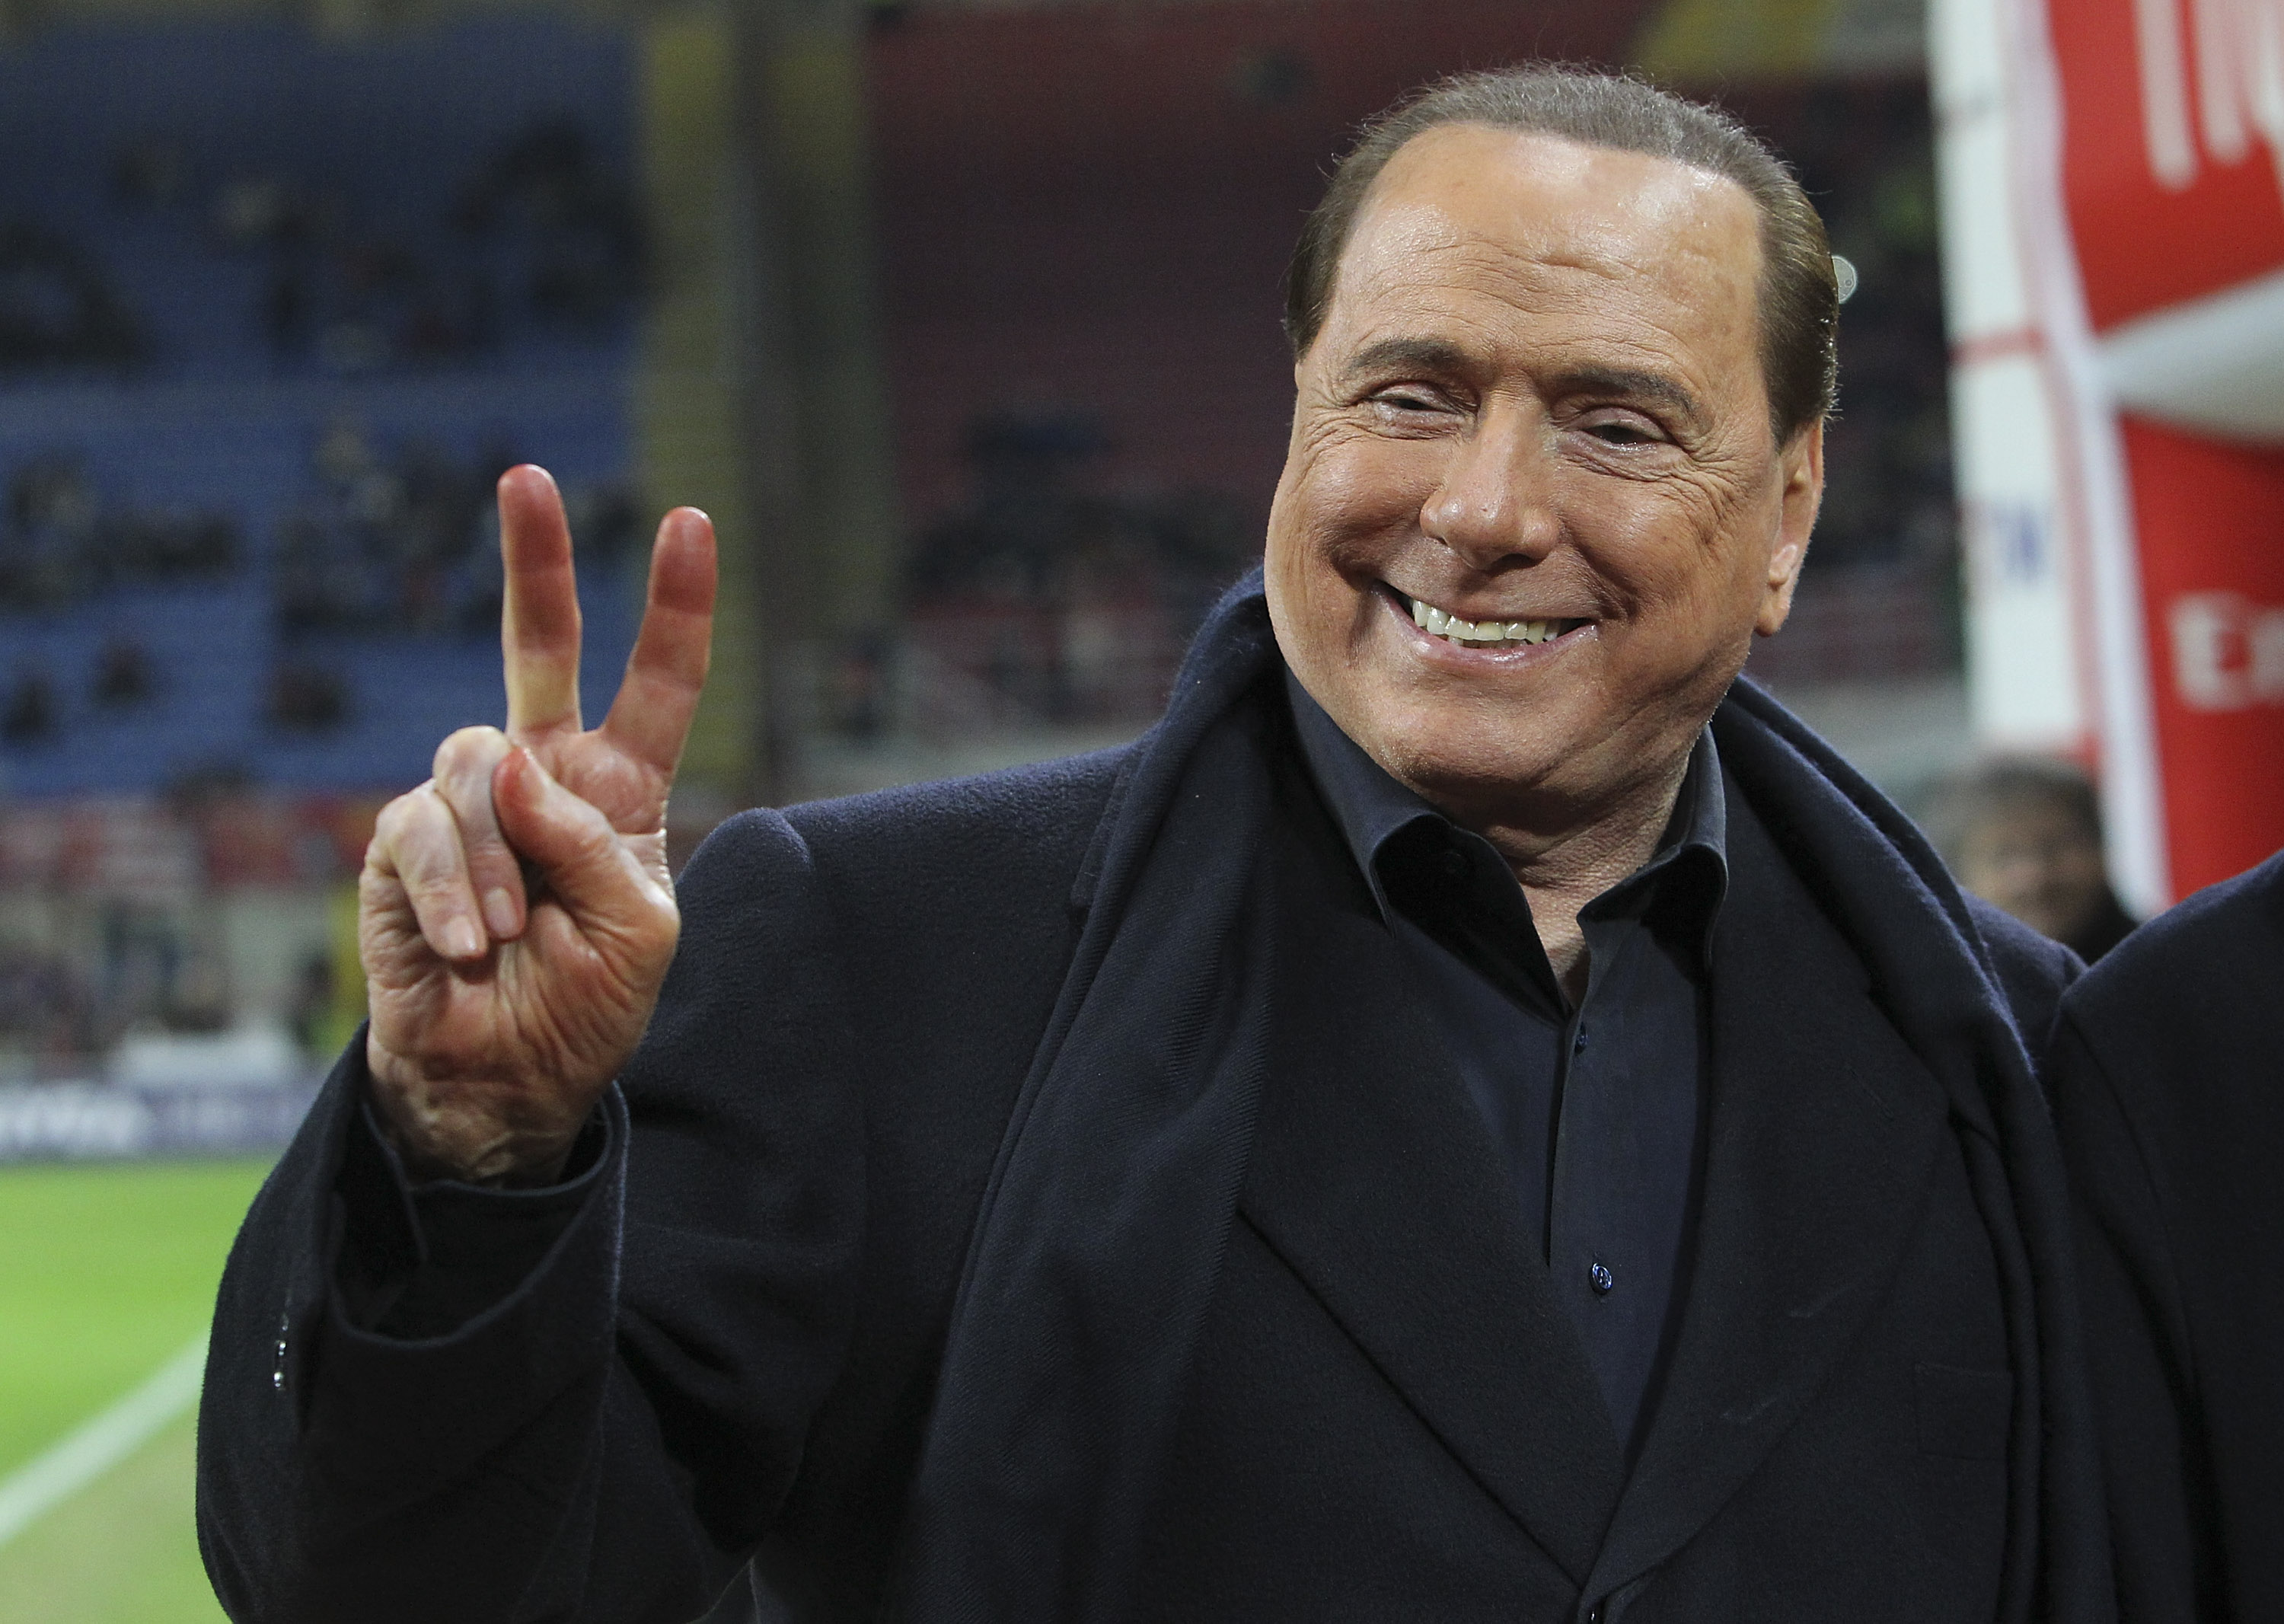 Silvio Berlusconi wants to be Italy's president. But there's 'zero possibility' of that, critics say